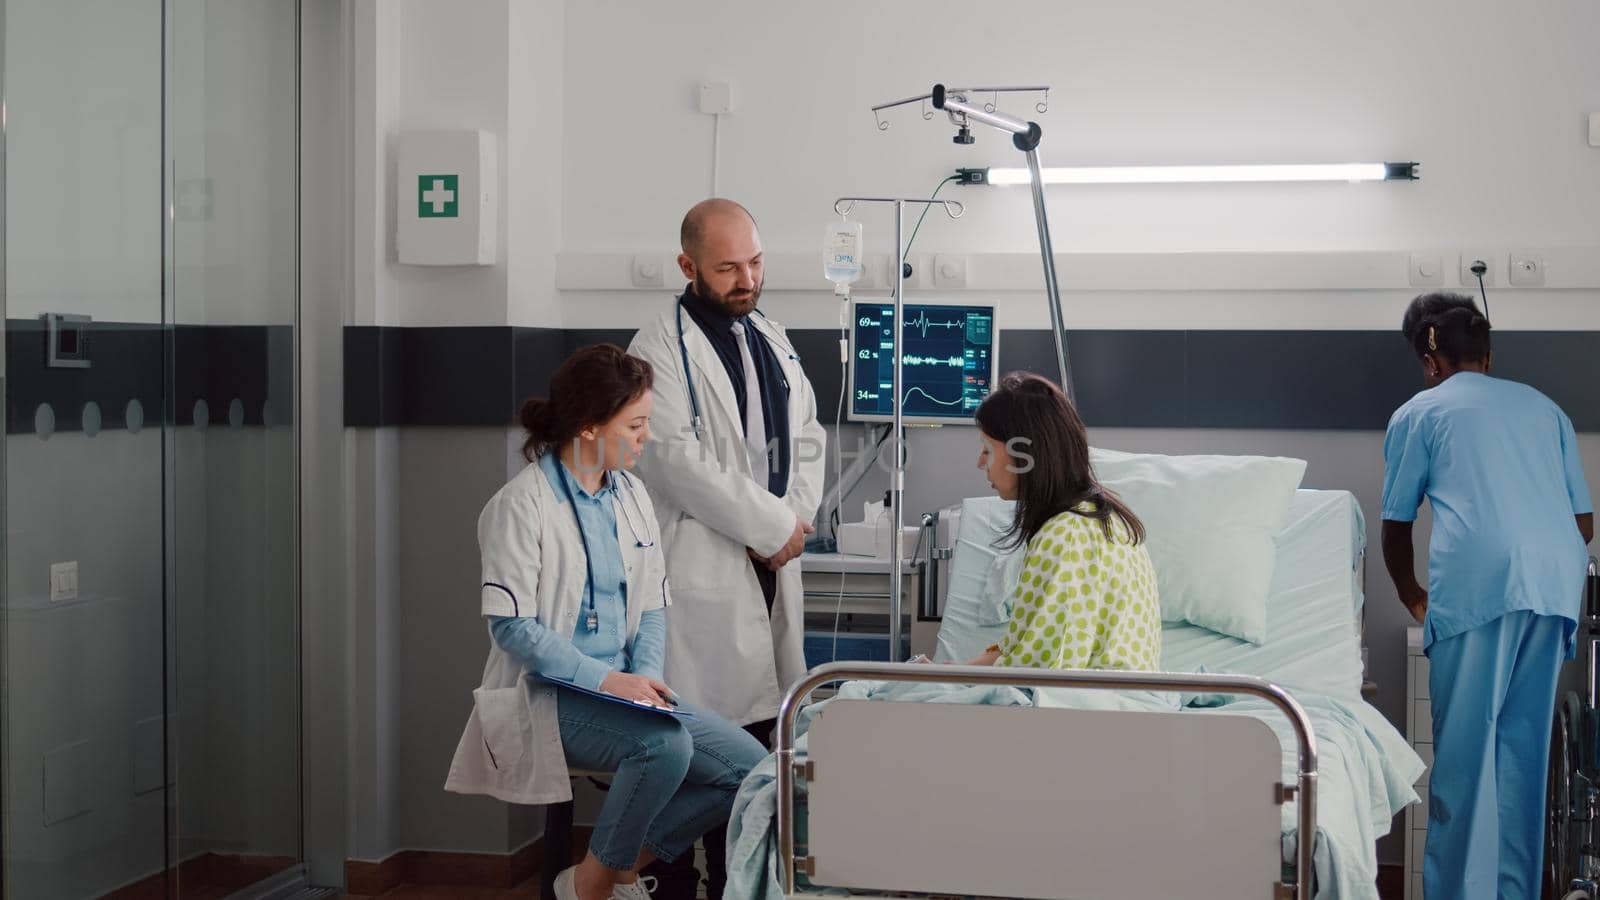 Specialist practitioner doctors monitoring sick man explaining illness treatment while working in hospital ward. Patient sitting in bed discussing symptom disease during recovery appointment